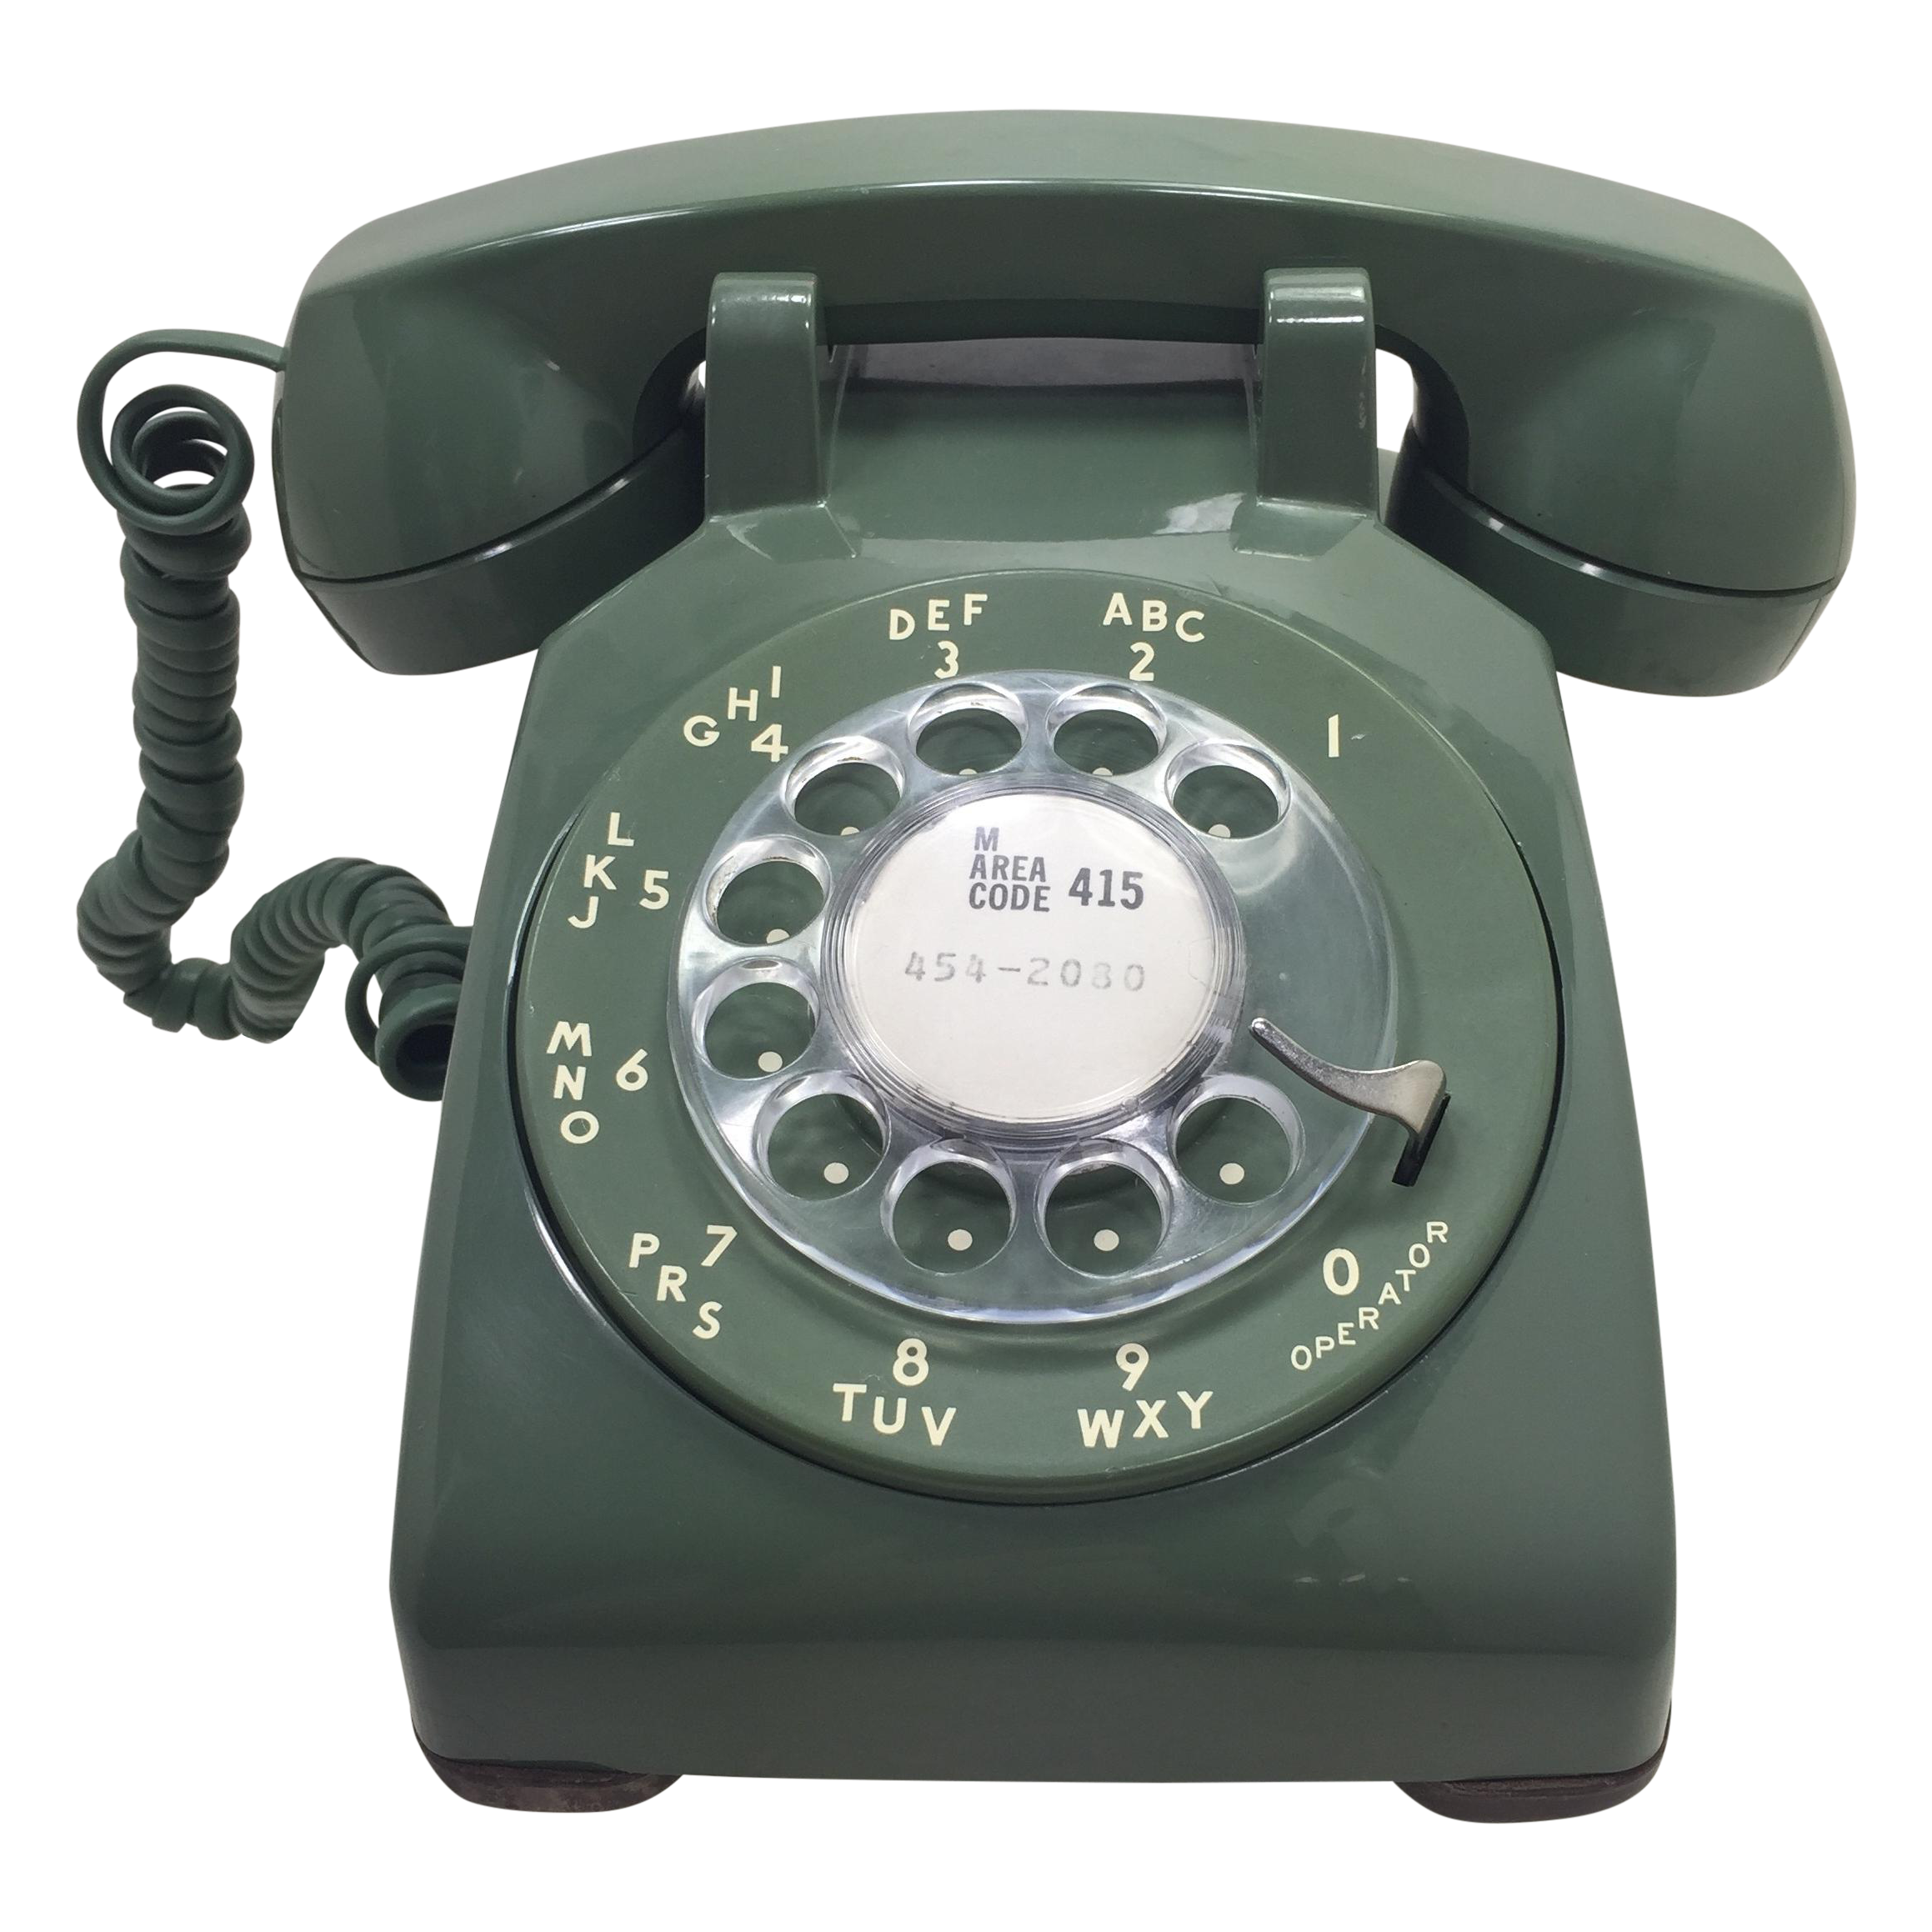 Rotary Telephone Png. #52108.